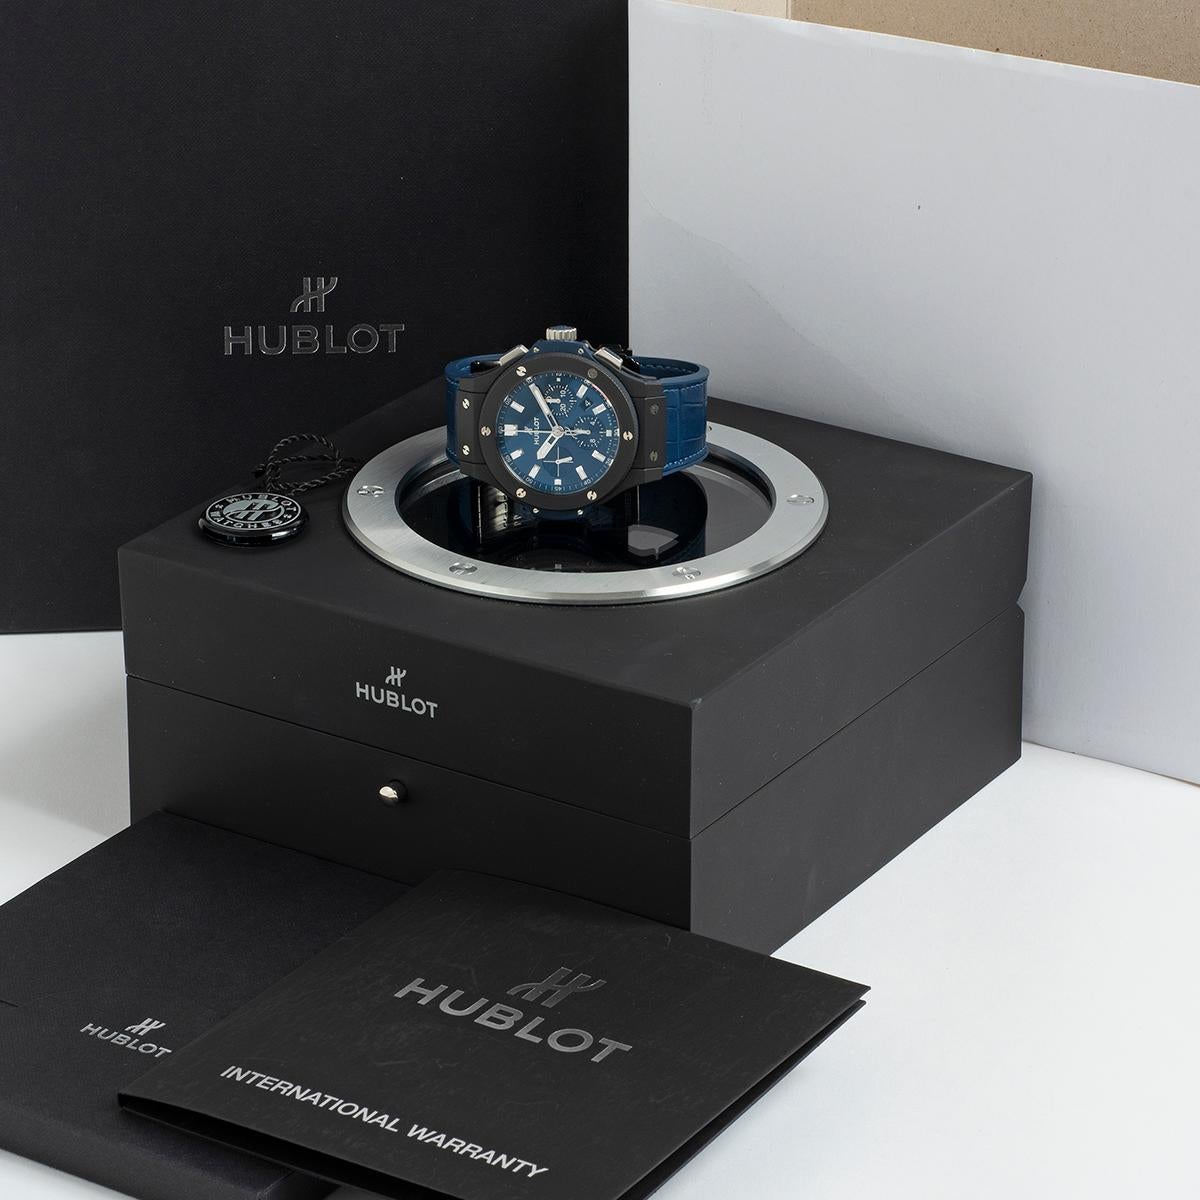 Our Hublot Big Bang Blue Chronograph ref 301.C1.7170.LR is instantly recognisable, featuring a micro-blasted ceramic 44mm case with screw-down crown, ceramic bezel and exhibition case back (showing the automatic HUB4100 movement) as well as a blue